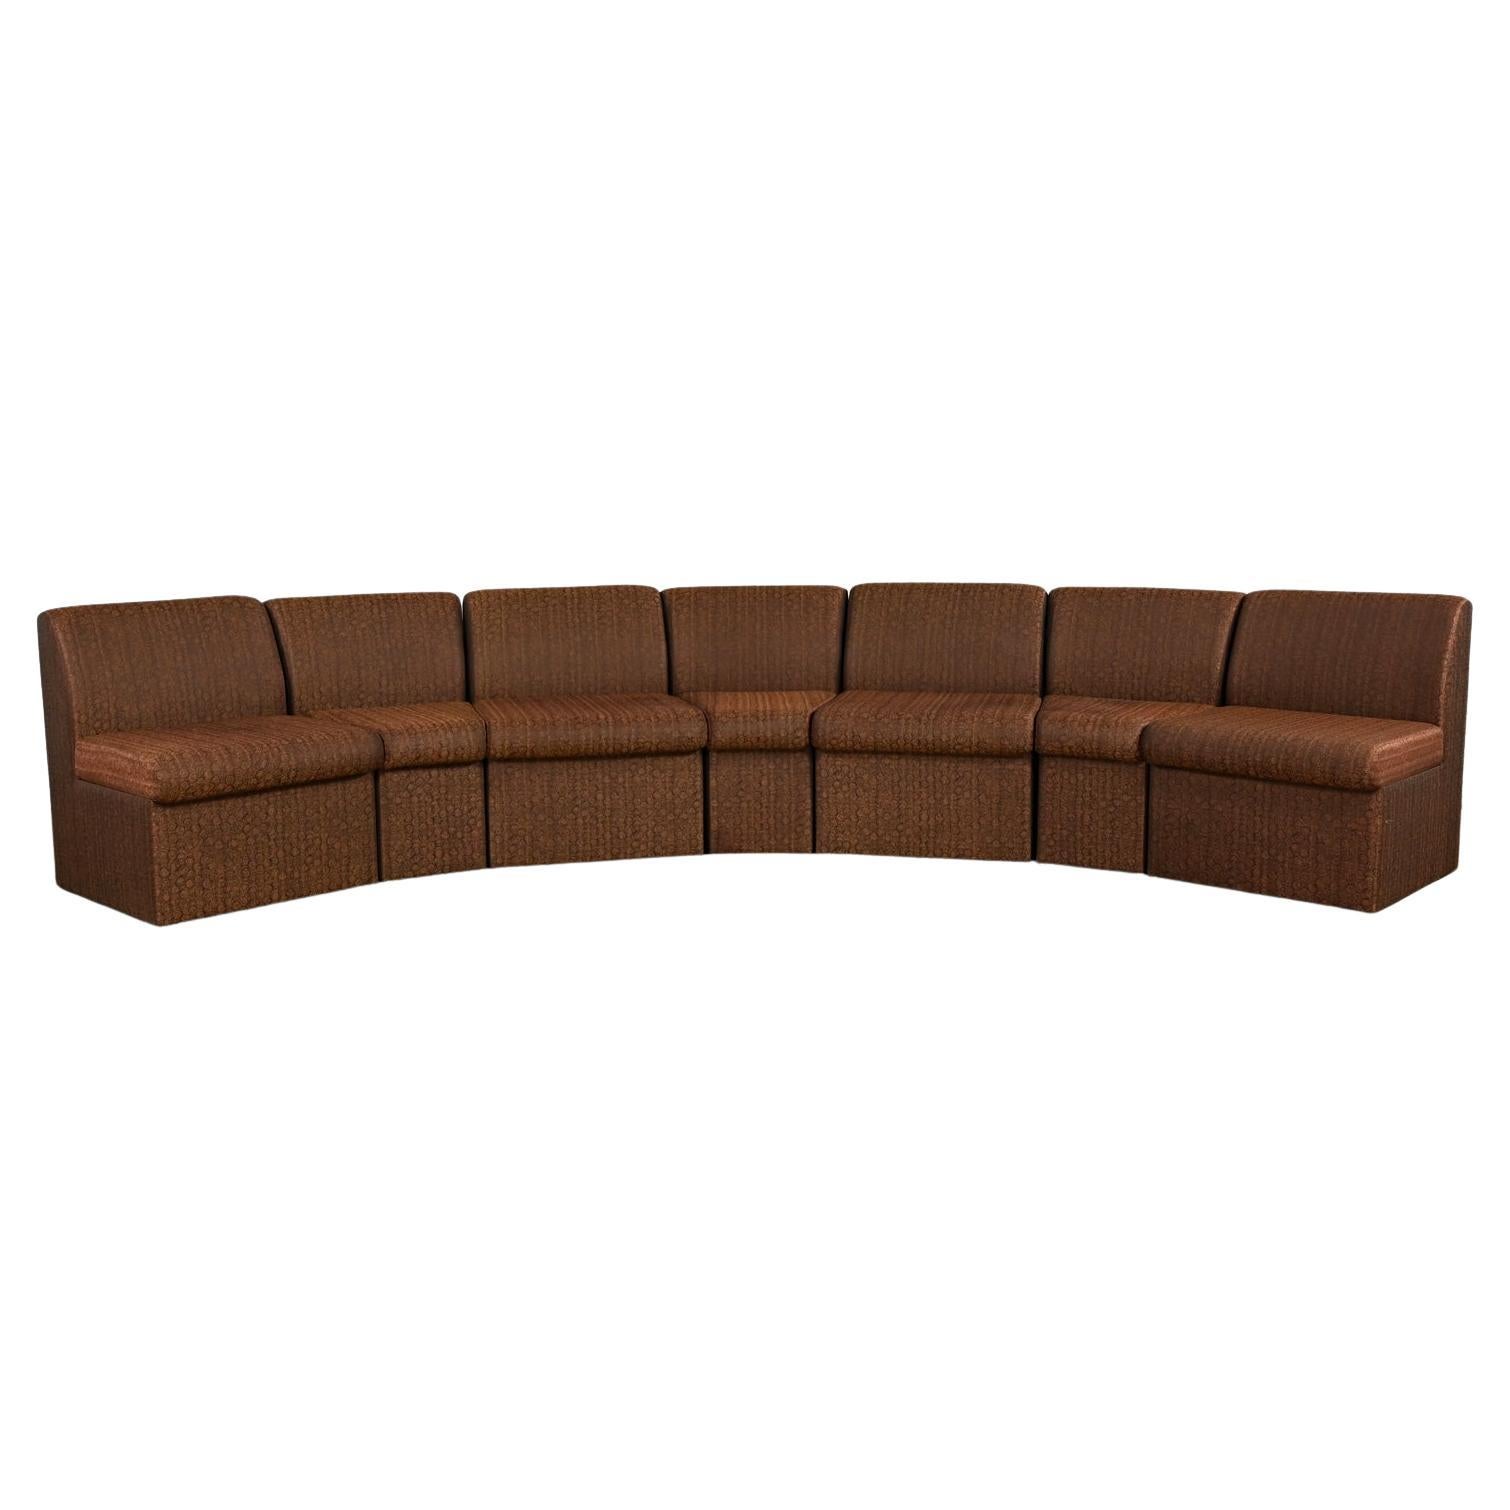 Late 20th Century Modern Global Upholstery Company Brown 7 Piece Sectional Sofa For Sale